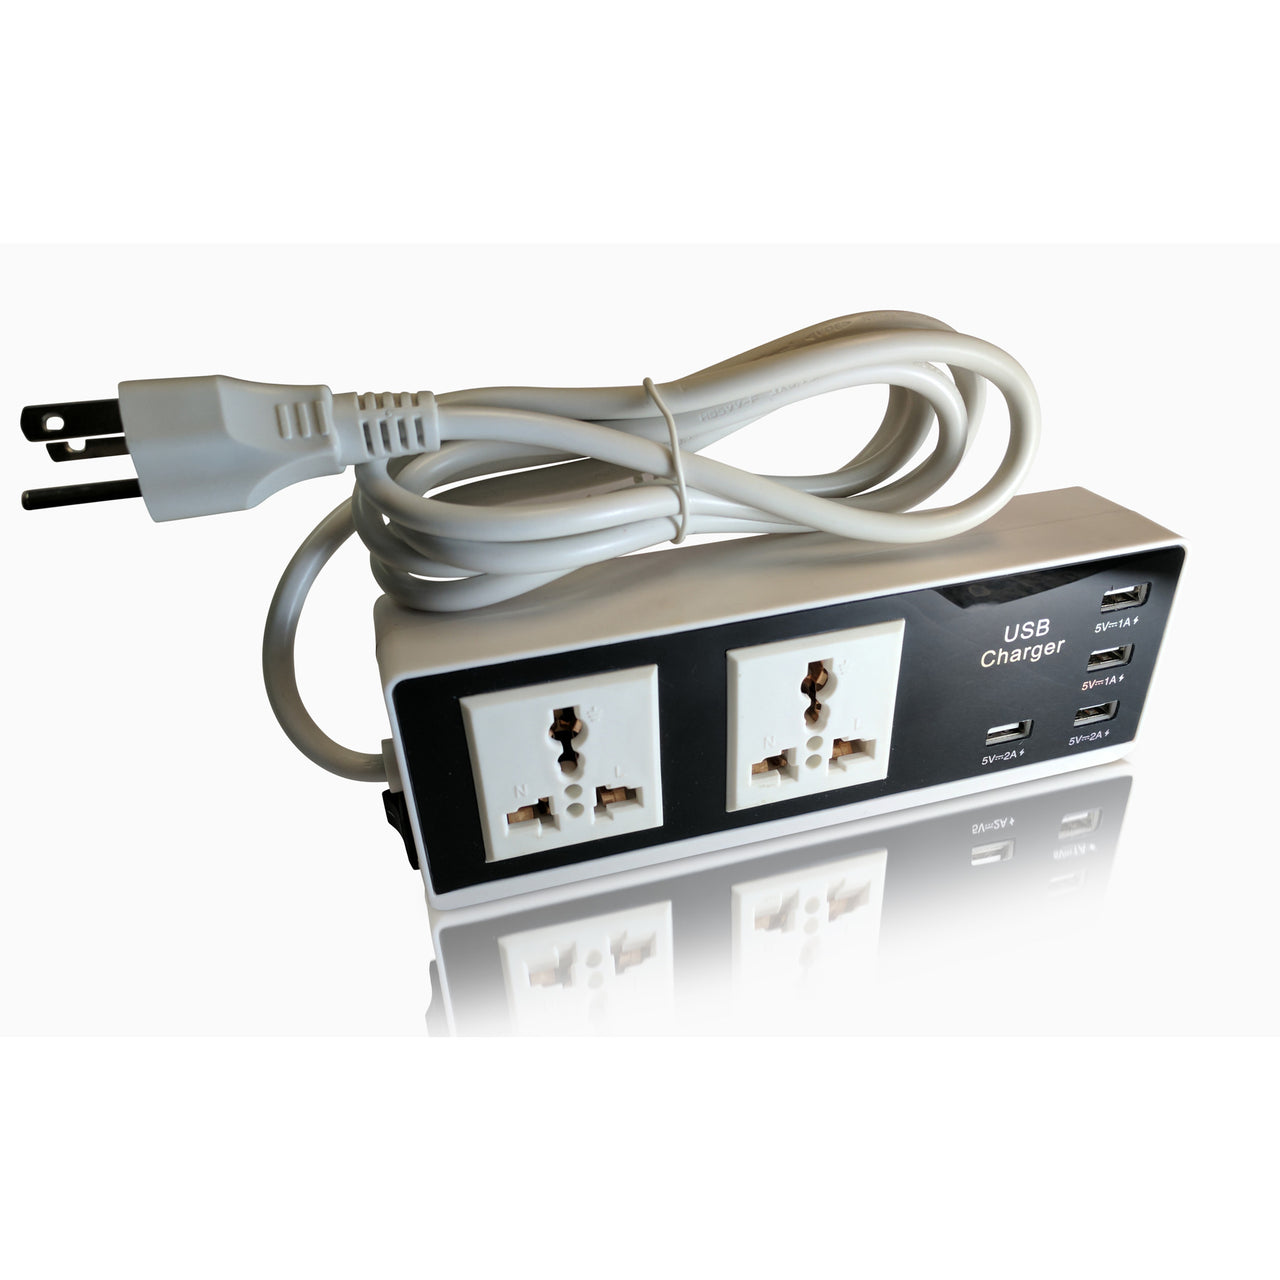 Tmvel 2500W 2 Outlet Surge Protector Power Strip with 4 Ports USB Charger - International Dual Voltage - Popularelectronics.com